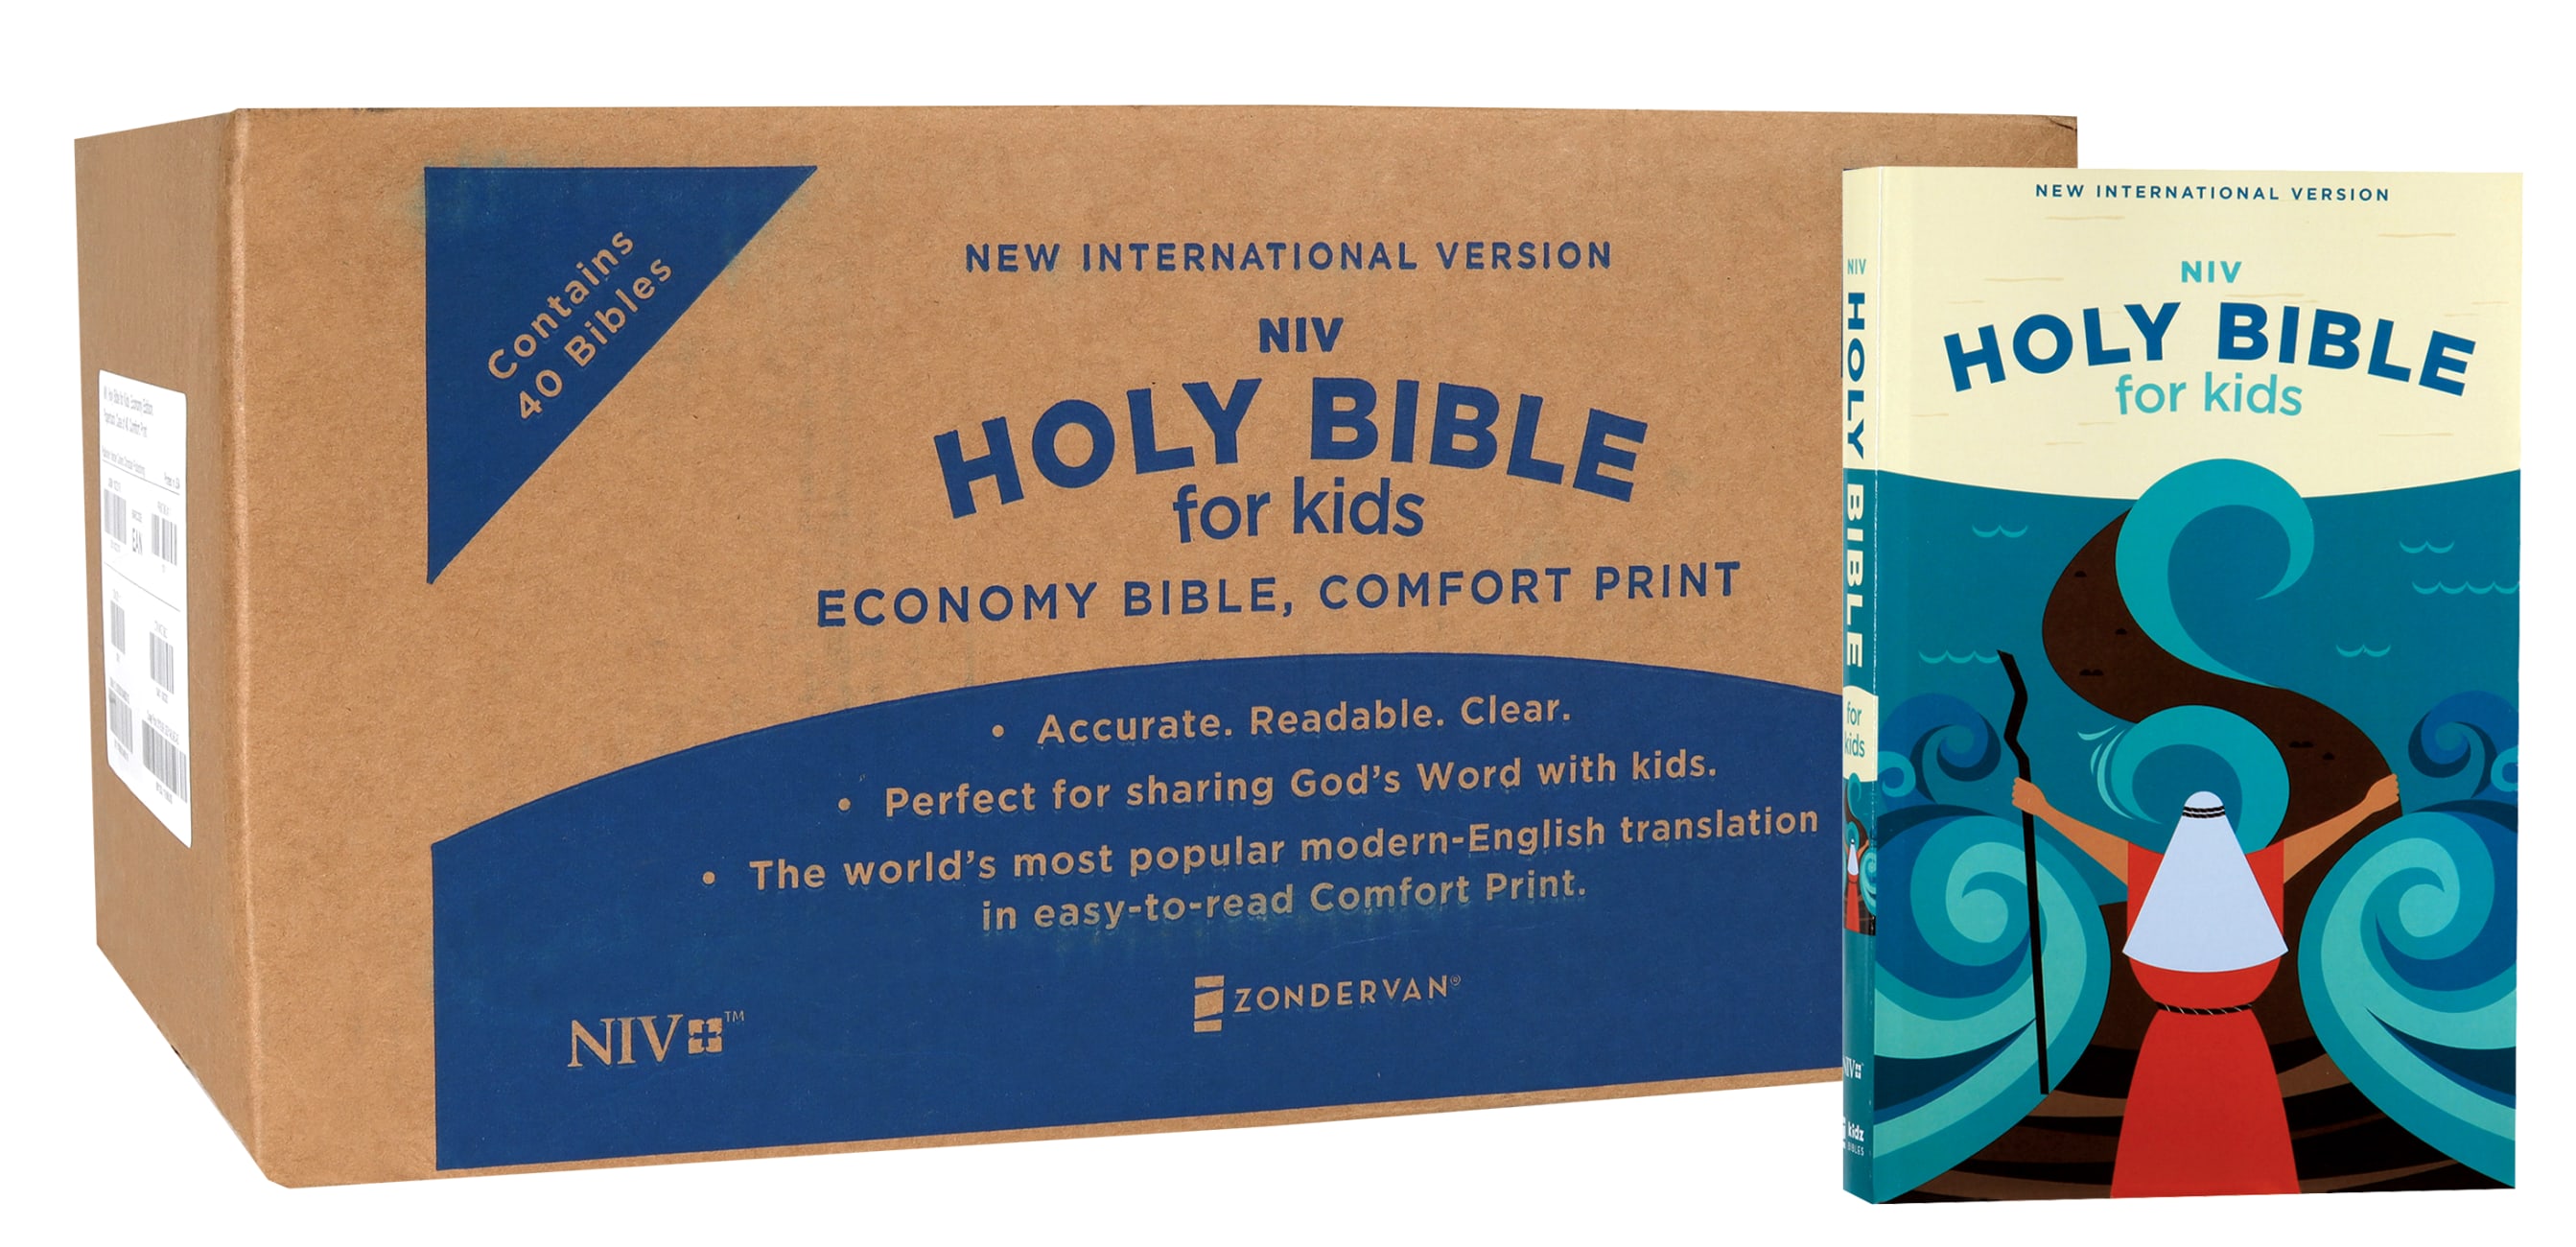 NIV Holy Bible For Kids Economy Comfort Print Edition (Black Letter Edition) (Case Of 40) Paperback